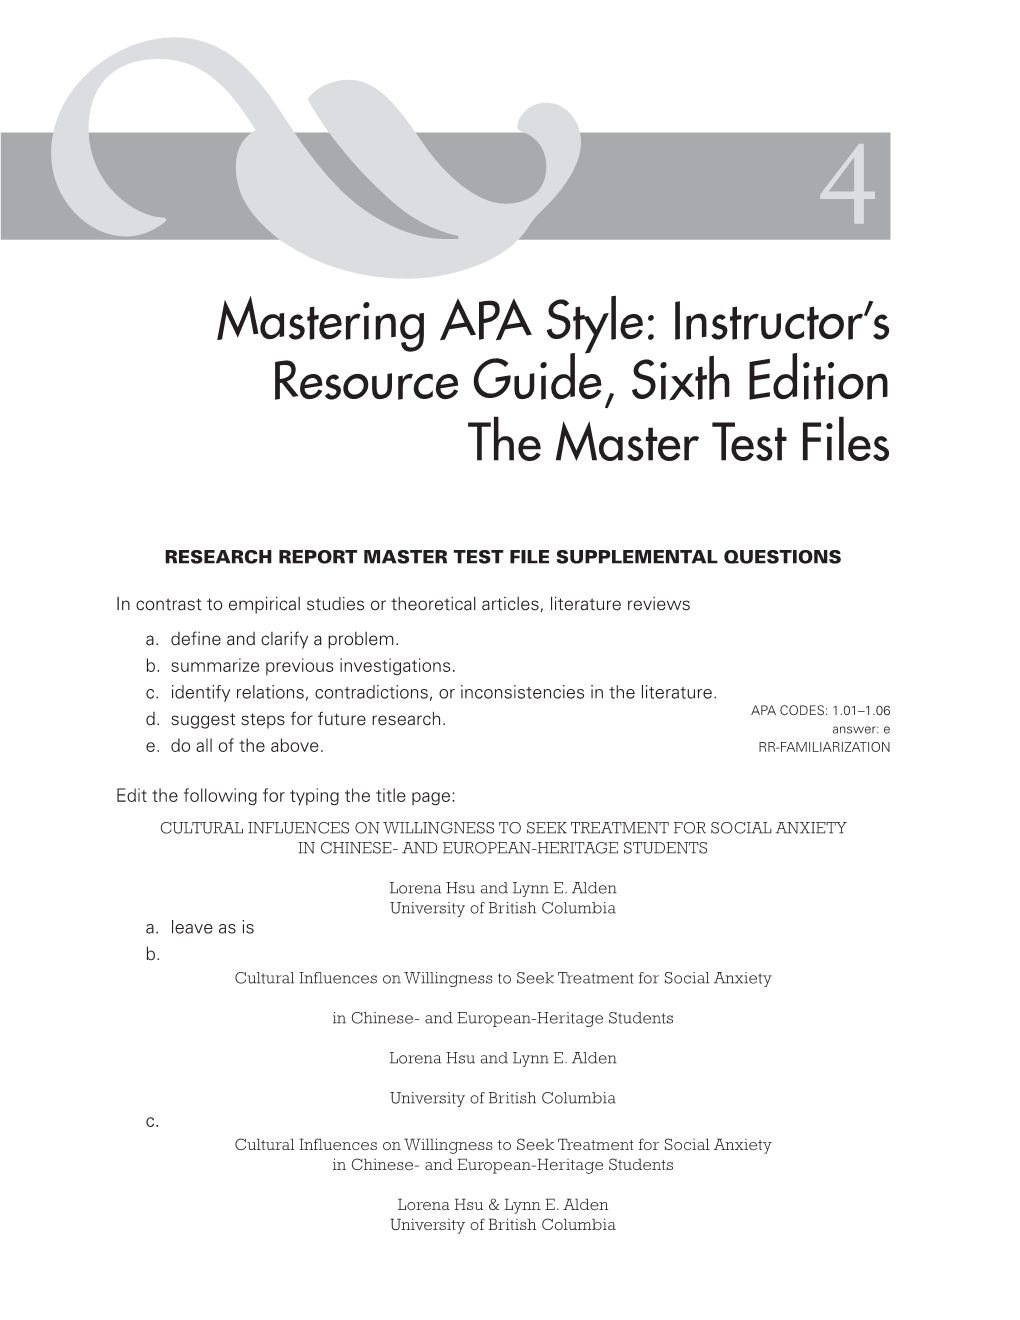 Mastering APA Style: Instructor's Resource Guide, Sixth Edition the Master Test Files